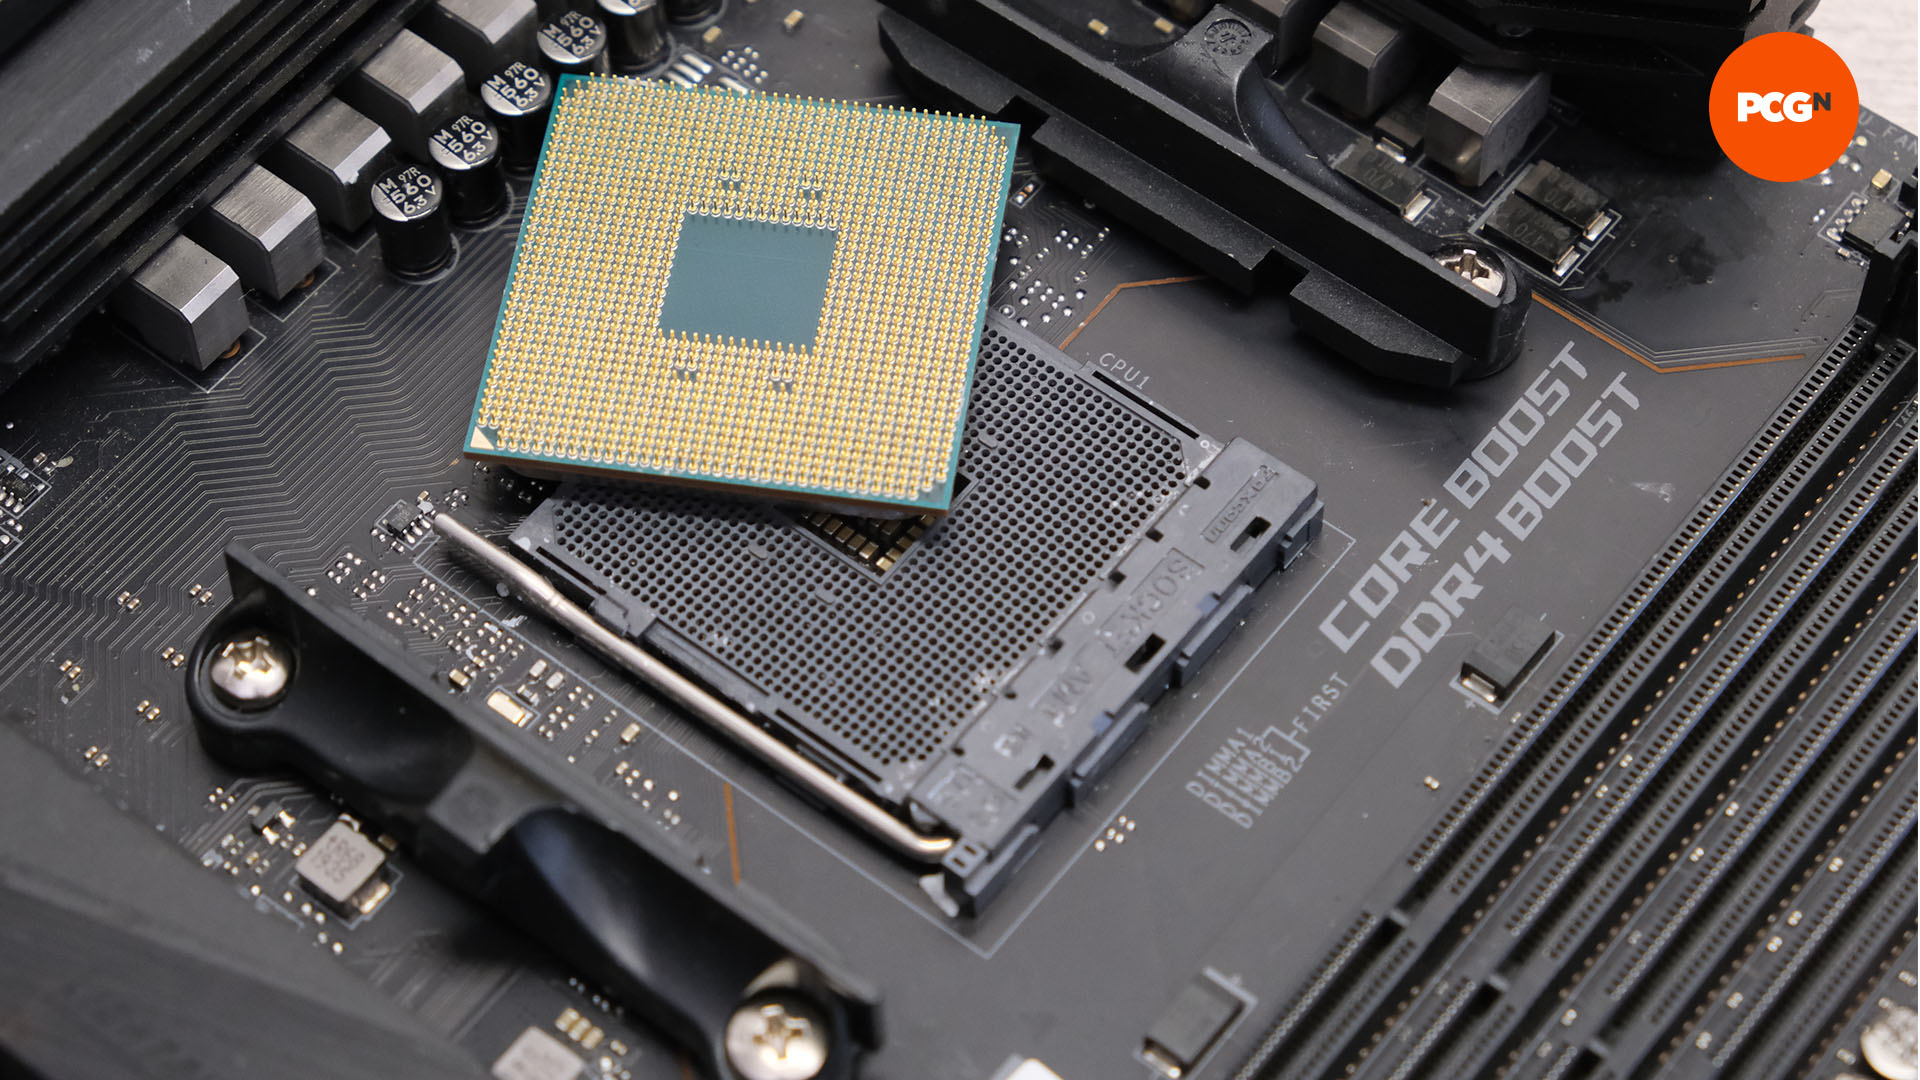 How to build a gaming PC: AMD Socket AM4 CPU and motherboard